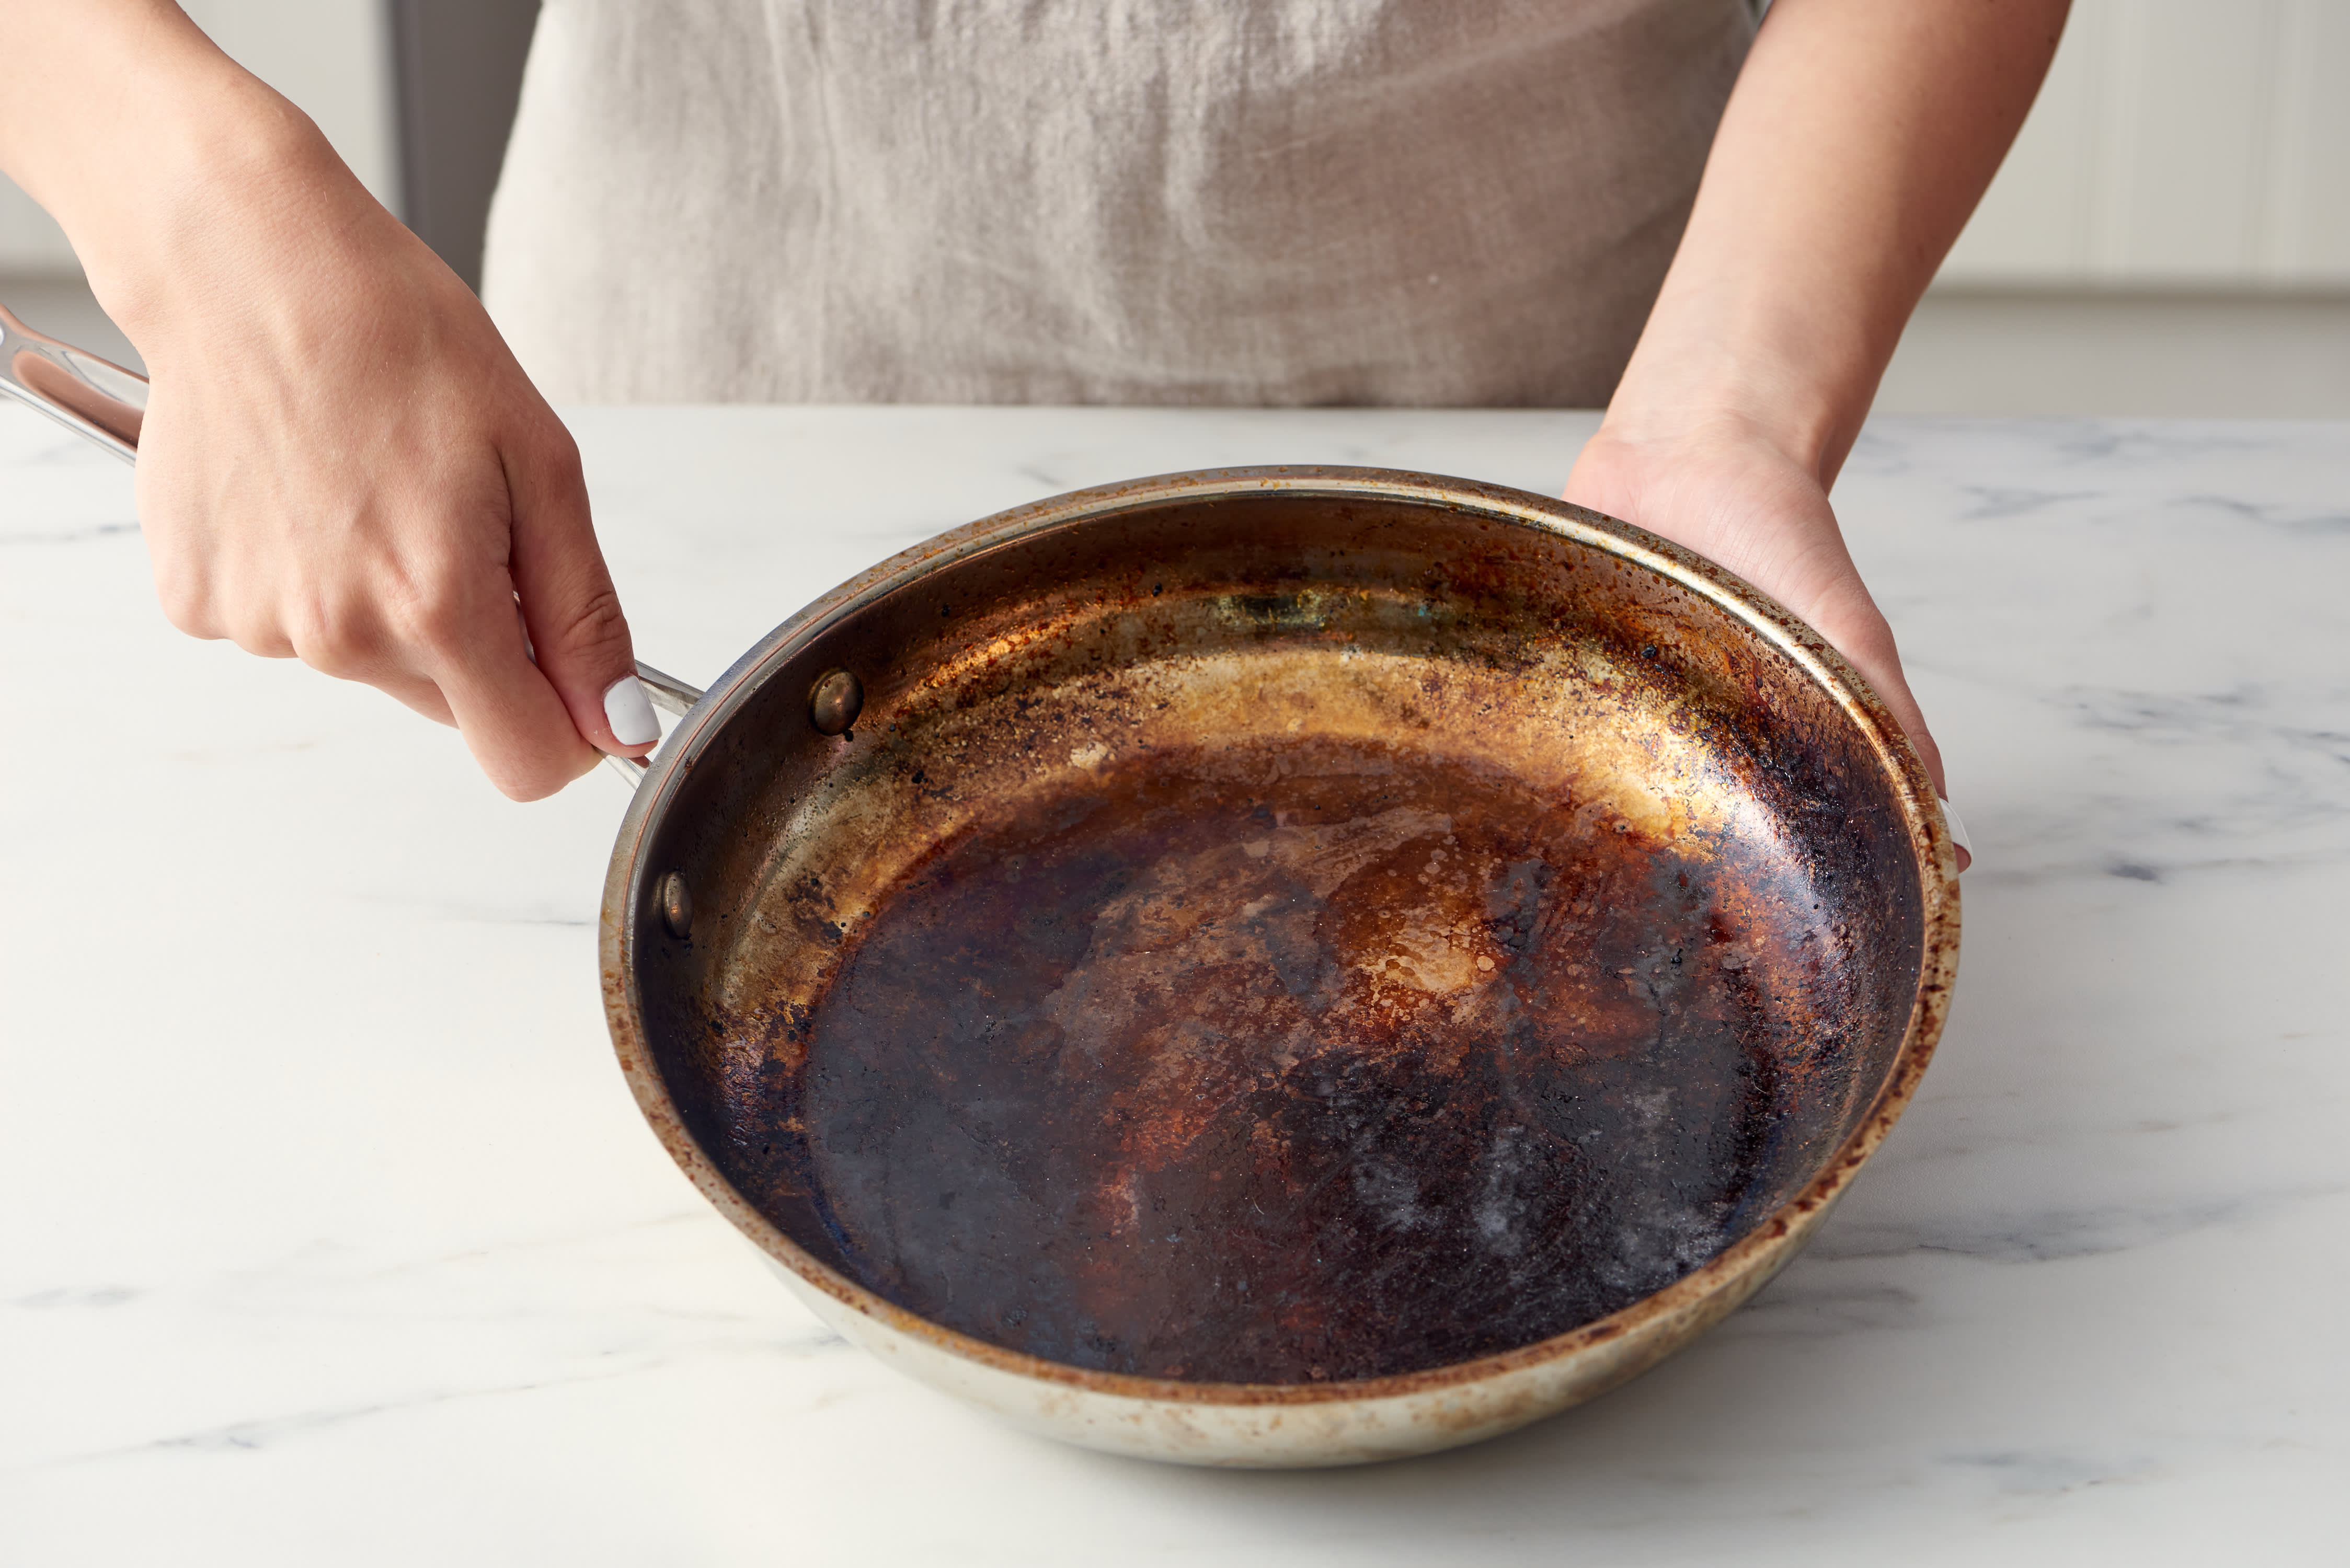 how to clean a burnt stainless steel skillet